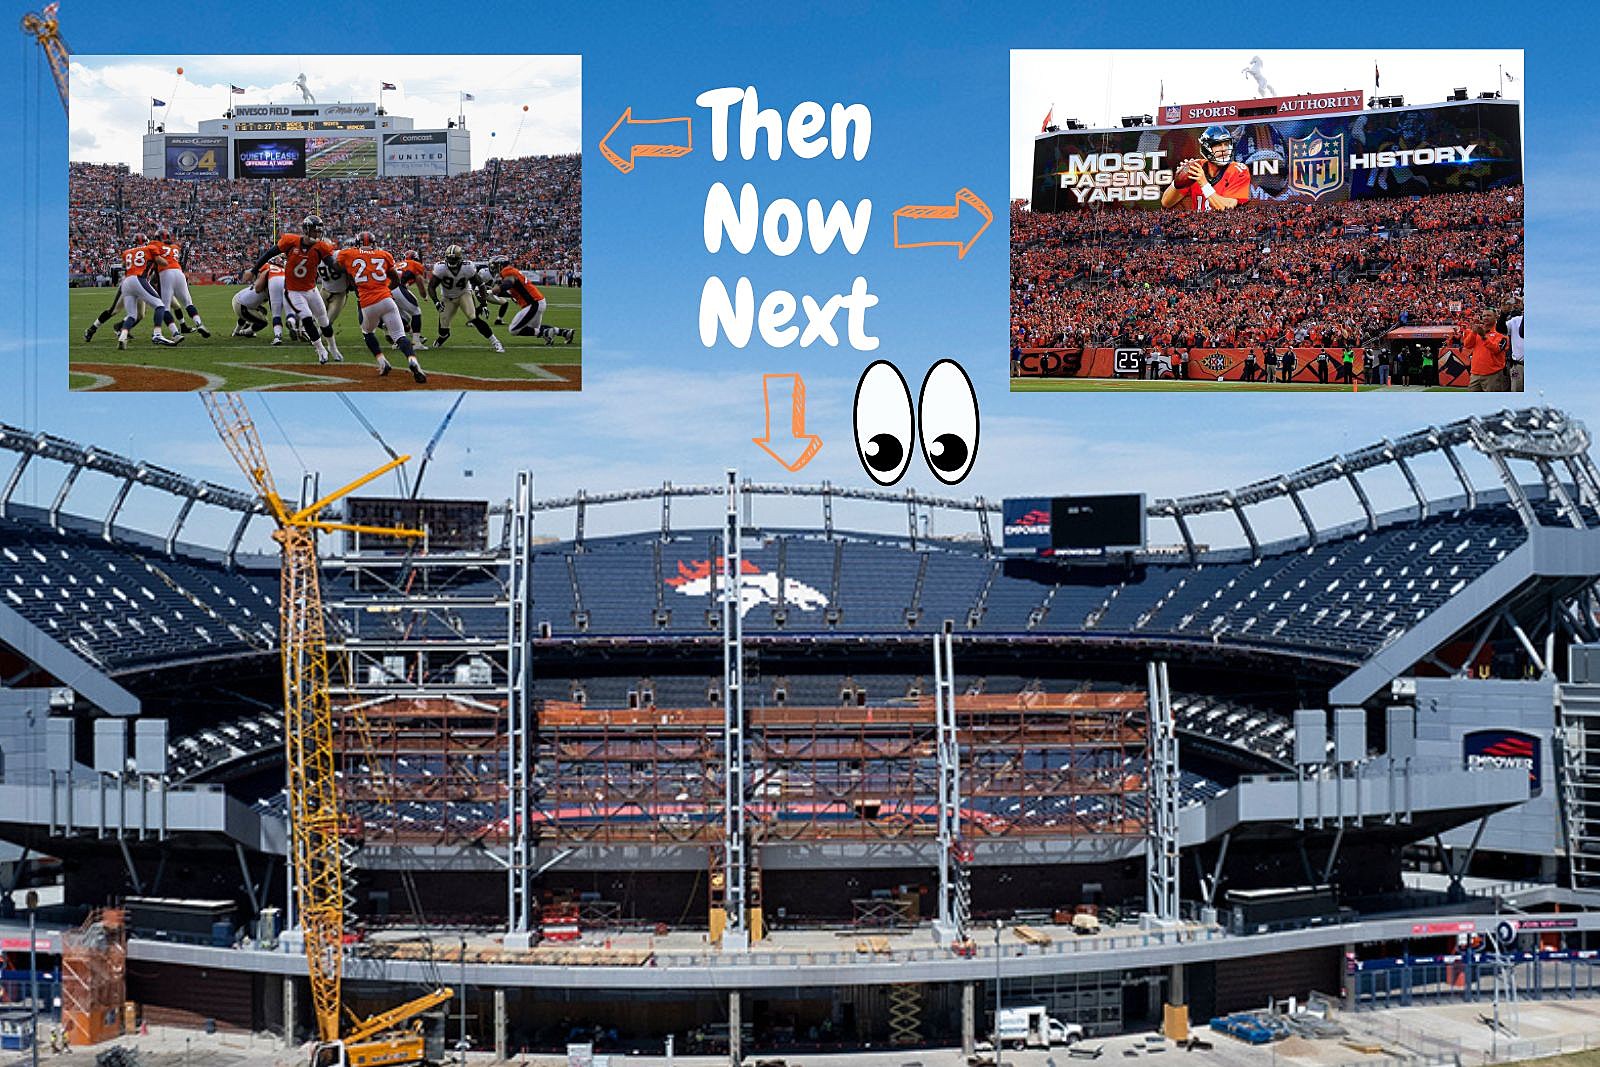 Broncos stadium renamed Empower Field at Mile High